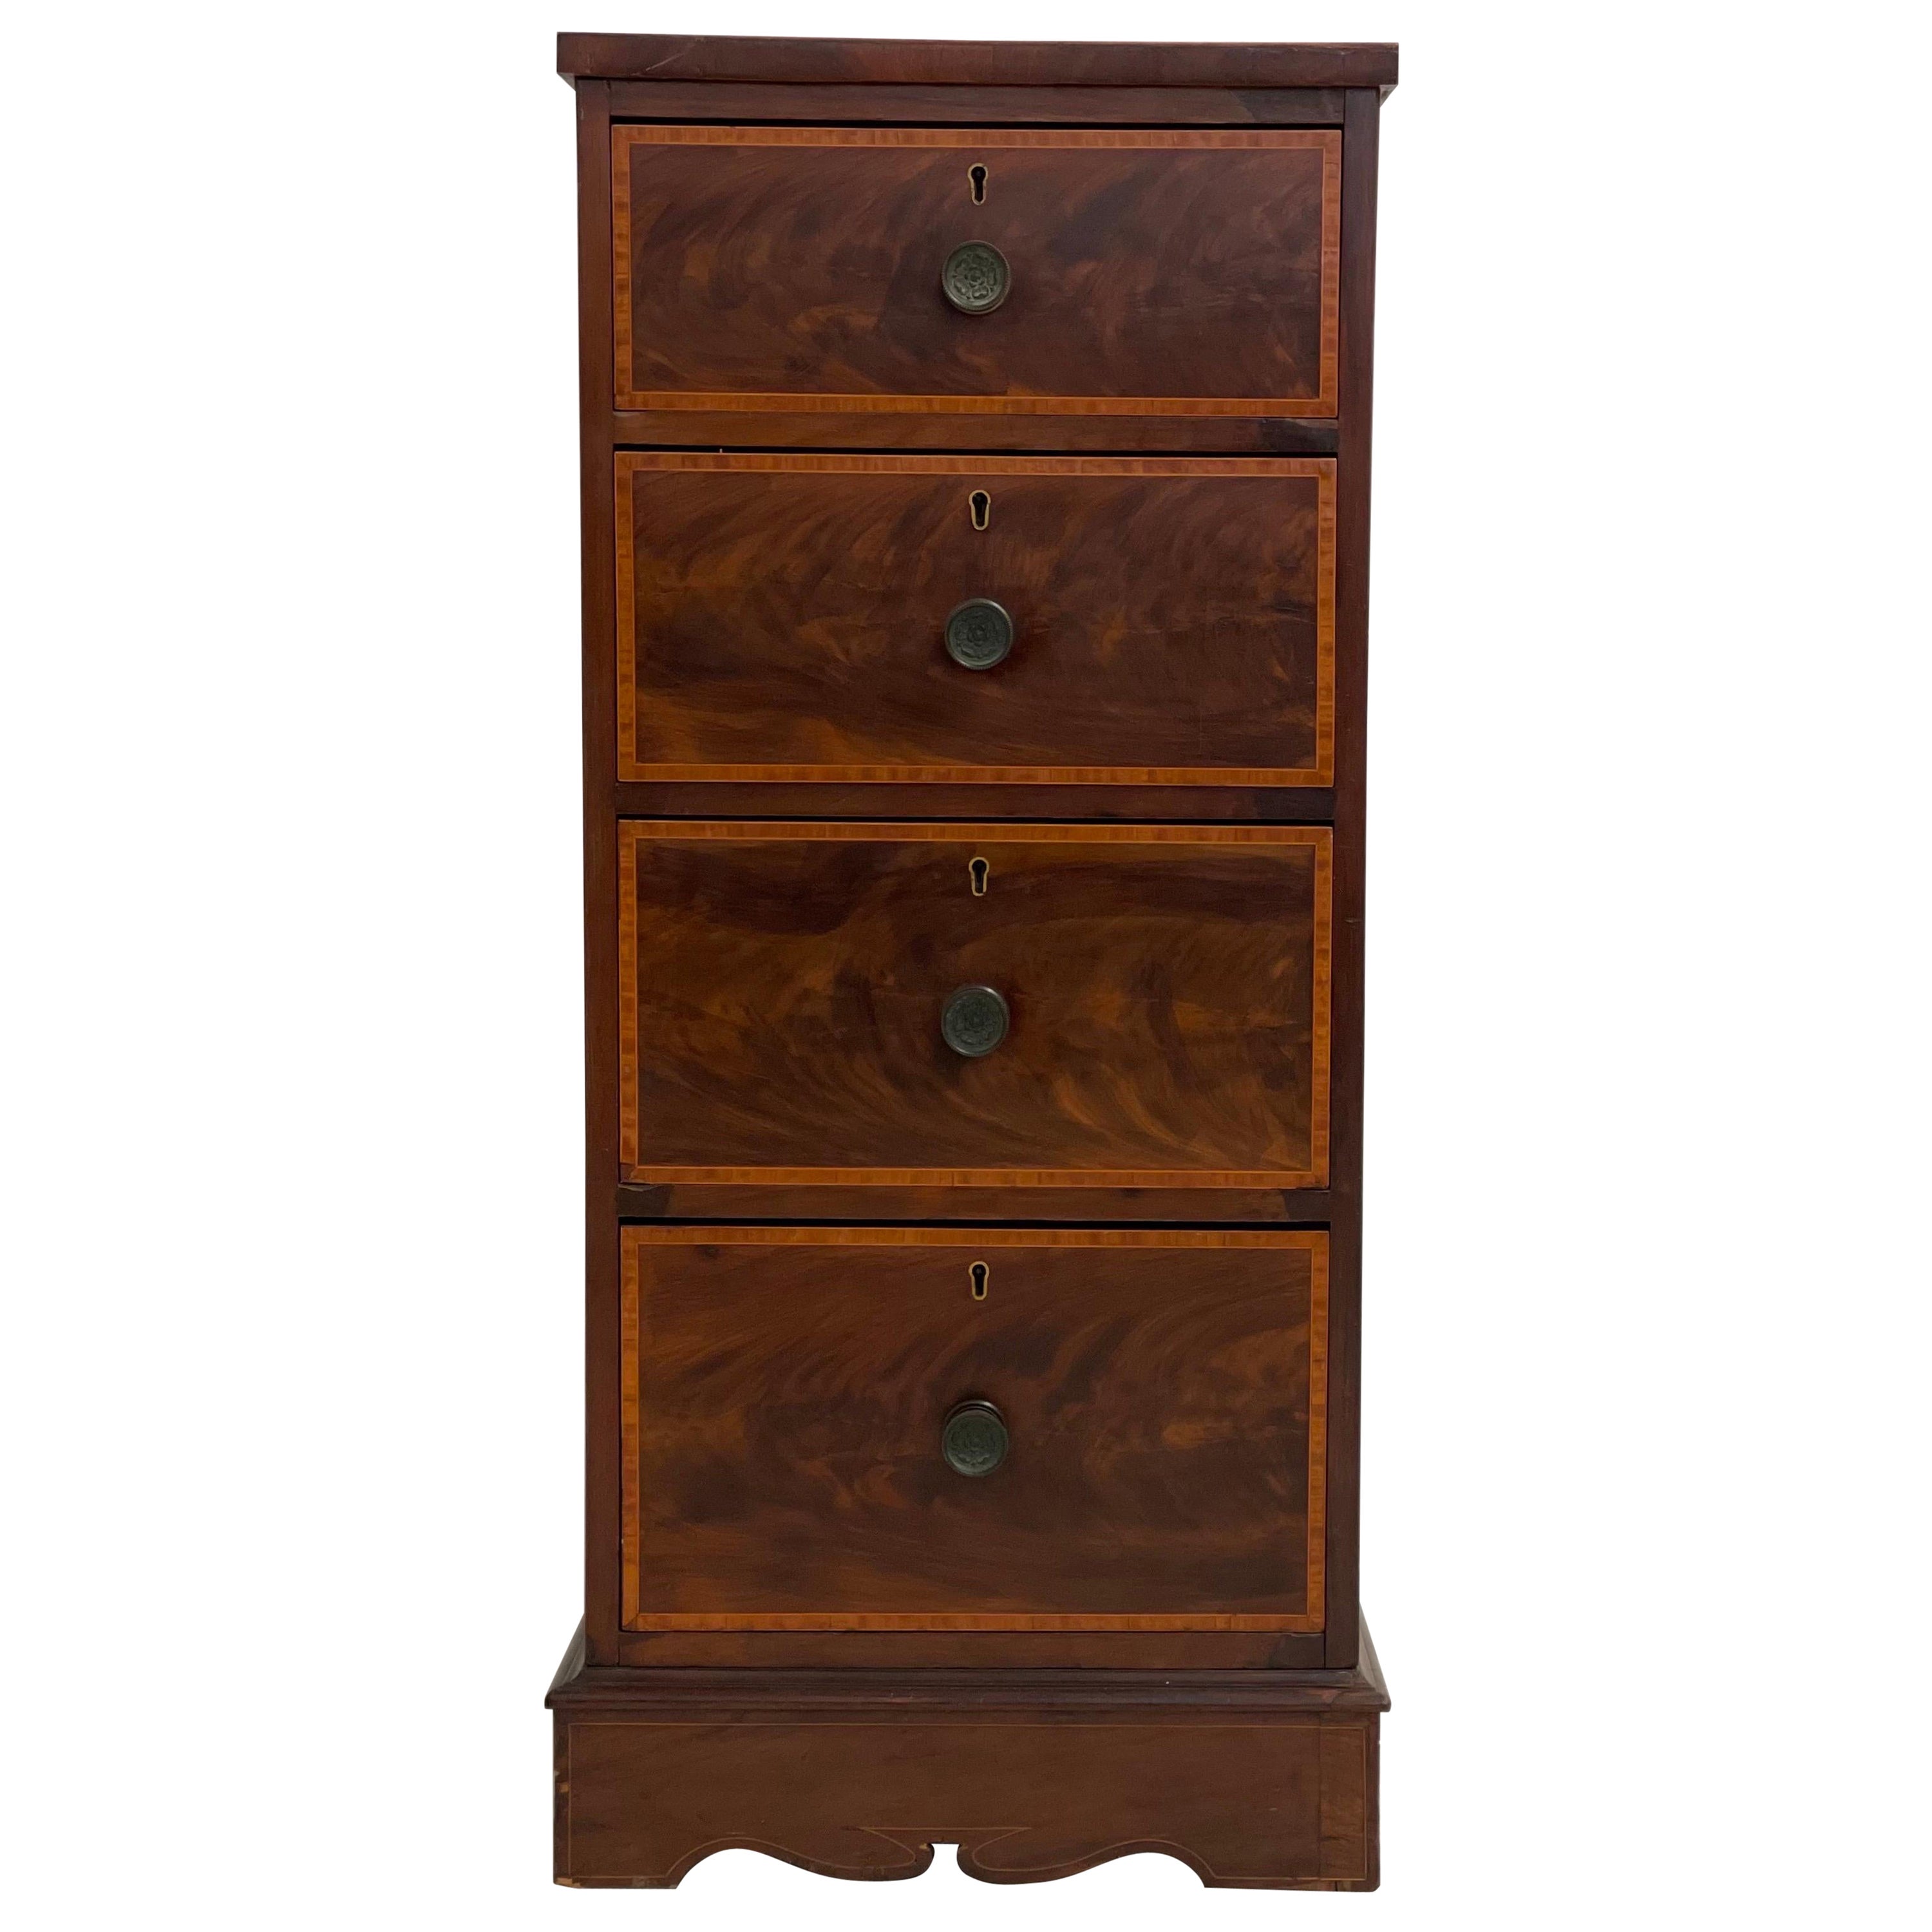 Antique Dresser Dovetail Drawers Cabinet Storage Possibly Circa 1890 For Sale